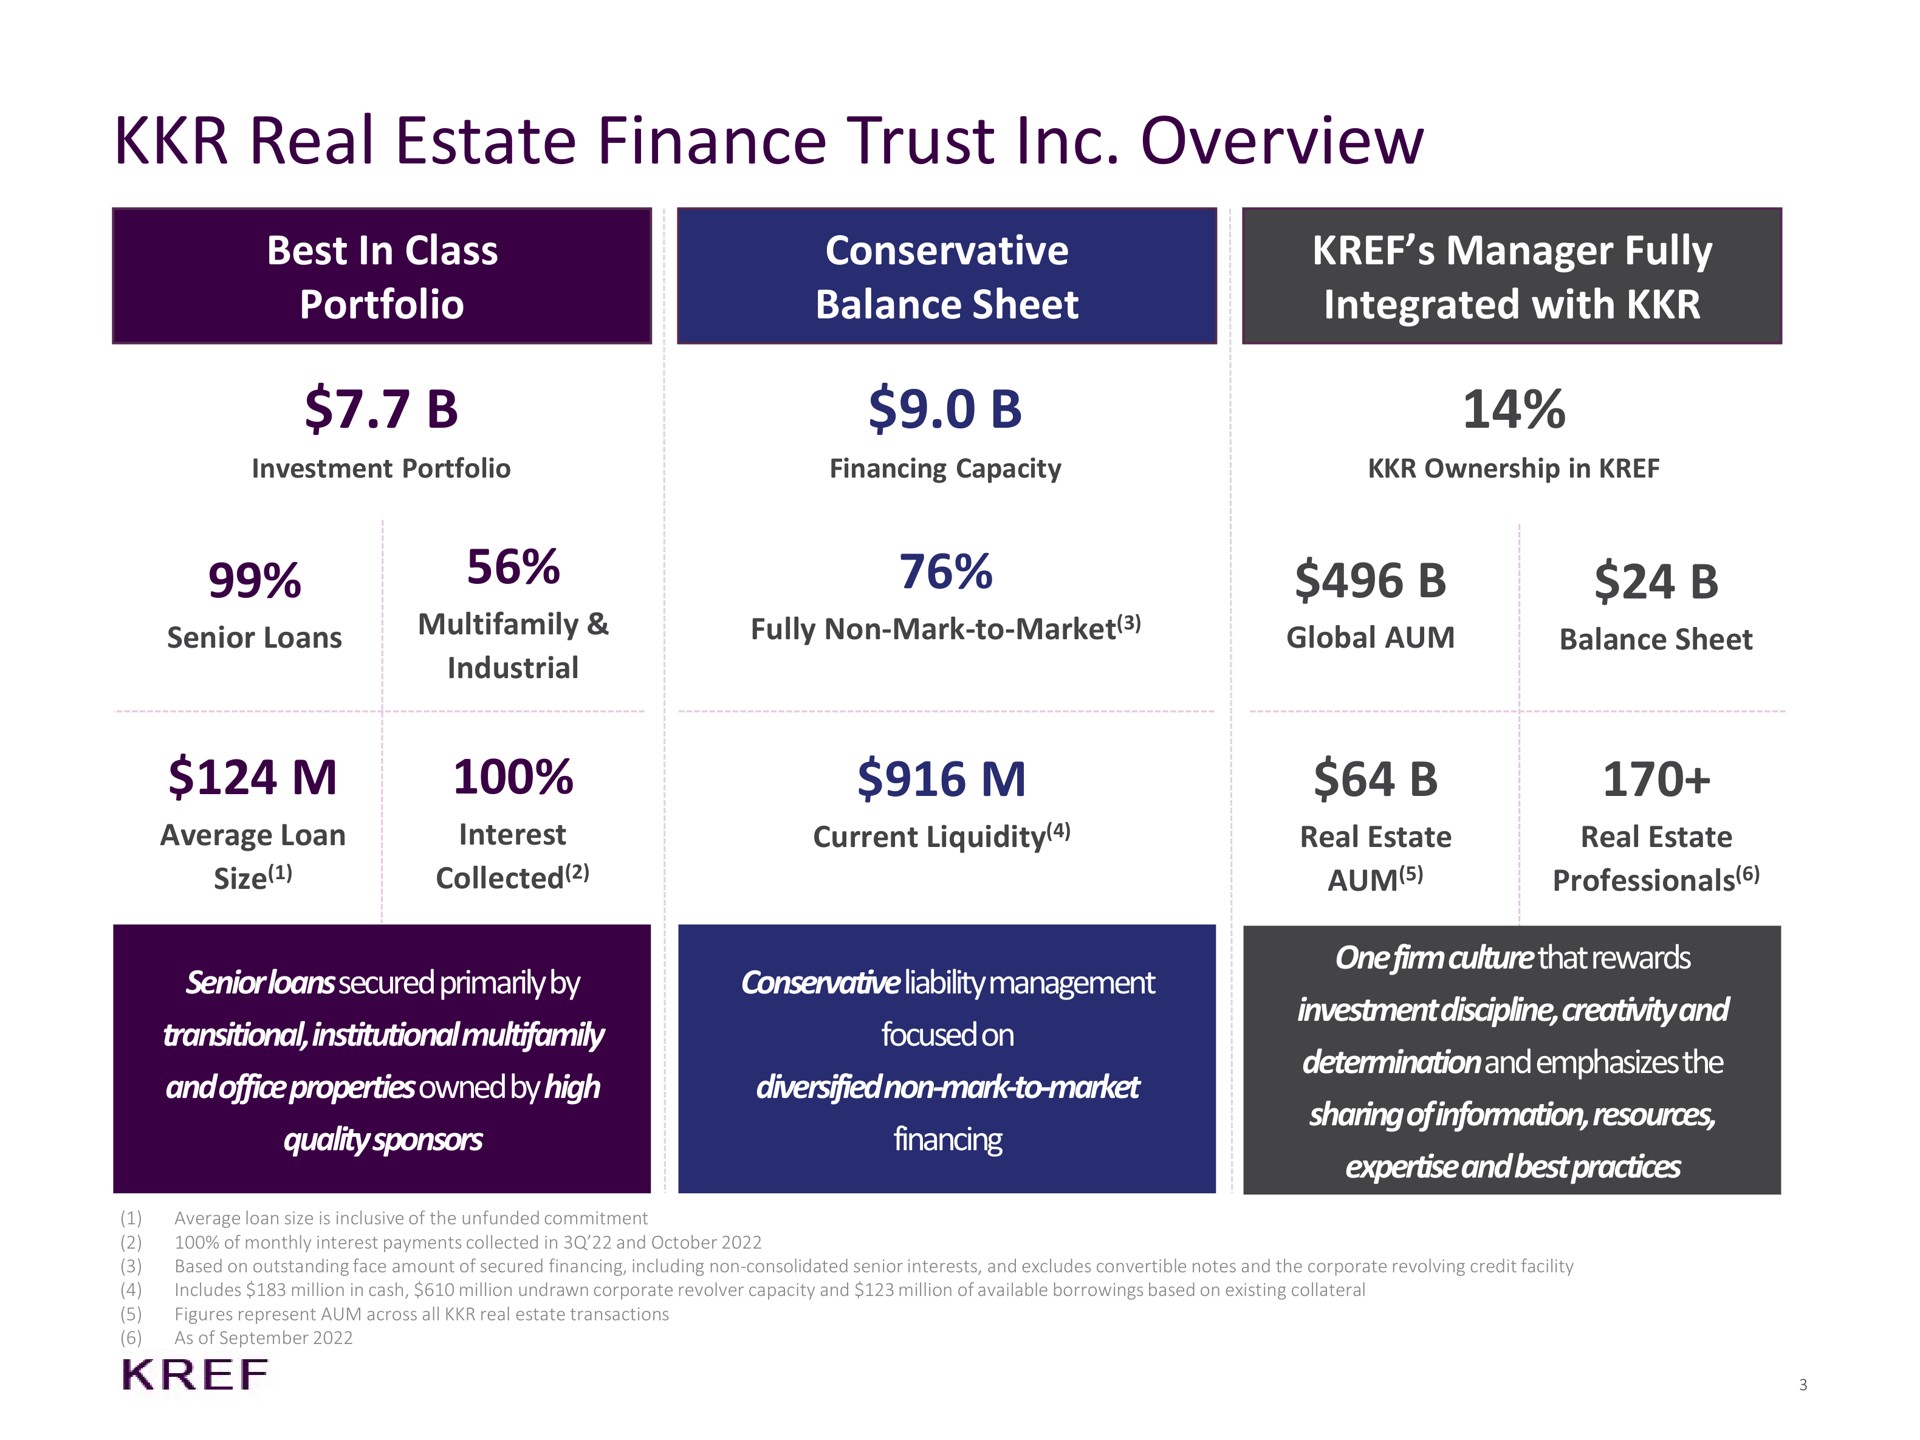 real estate finance trust overview best in class portfolio conservative balance sheet manager fully integrated with senior loans secured primarily by transitional institutional and office properties owned by high quality sponsors management focused on diversified non mark to market financing one firm rewards investment discipline creativity and determination and emphasizes the sharing of information resources and best practices seem mae | KKR Real Estate Finance Trust